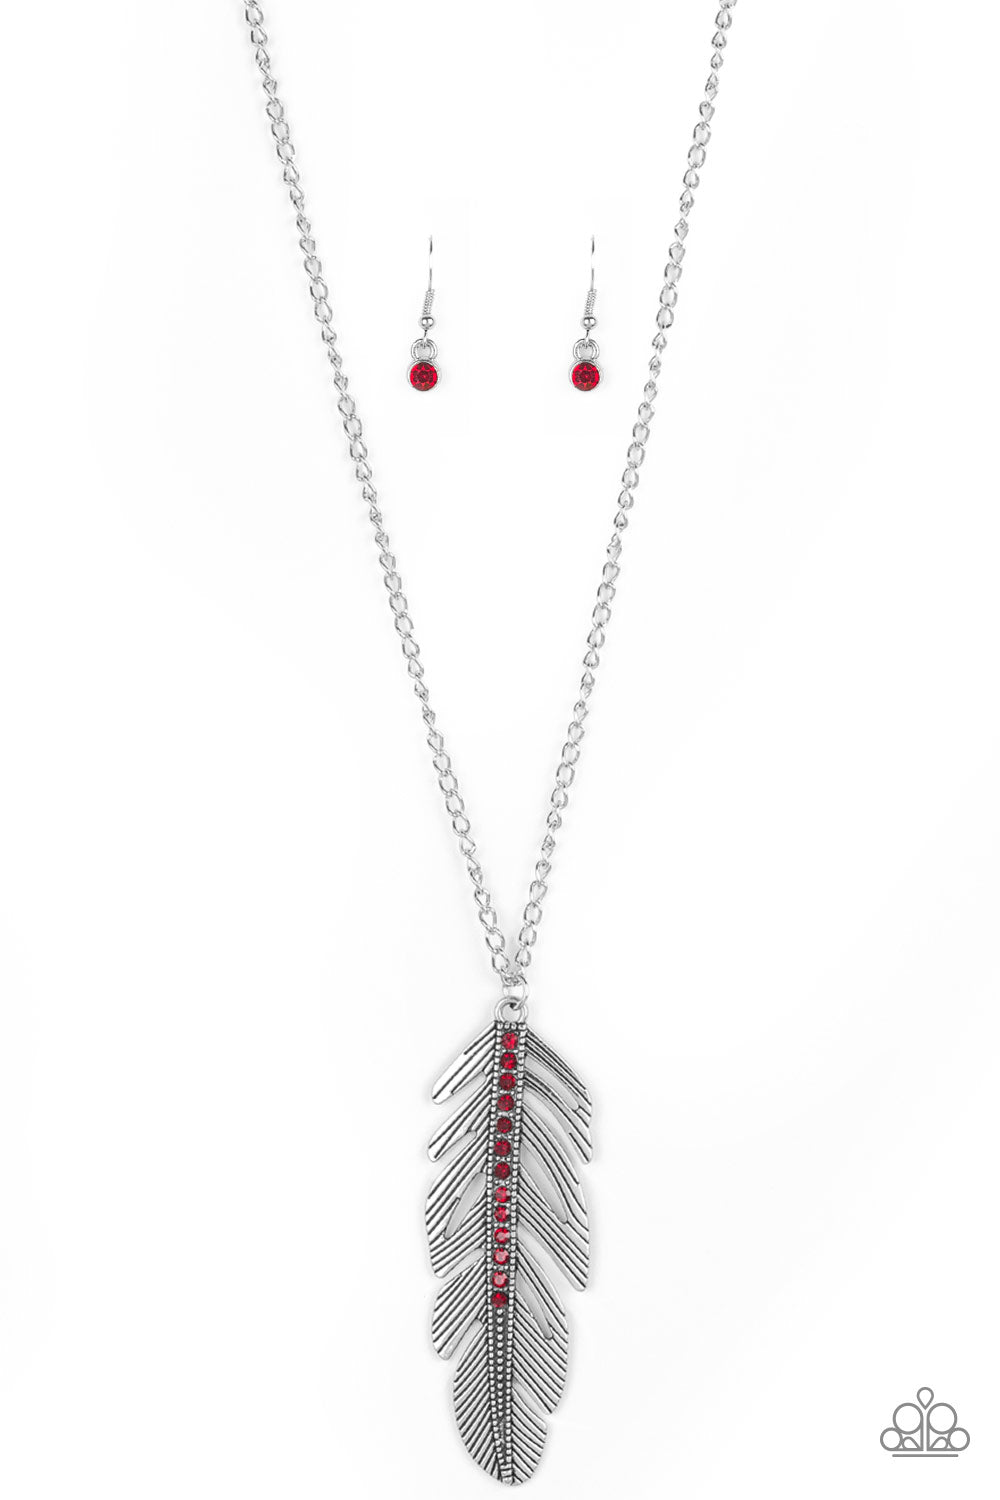 Paparazzi Accessories Sky Quest - Red Necklace & Earrings 